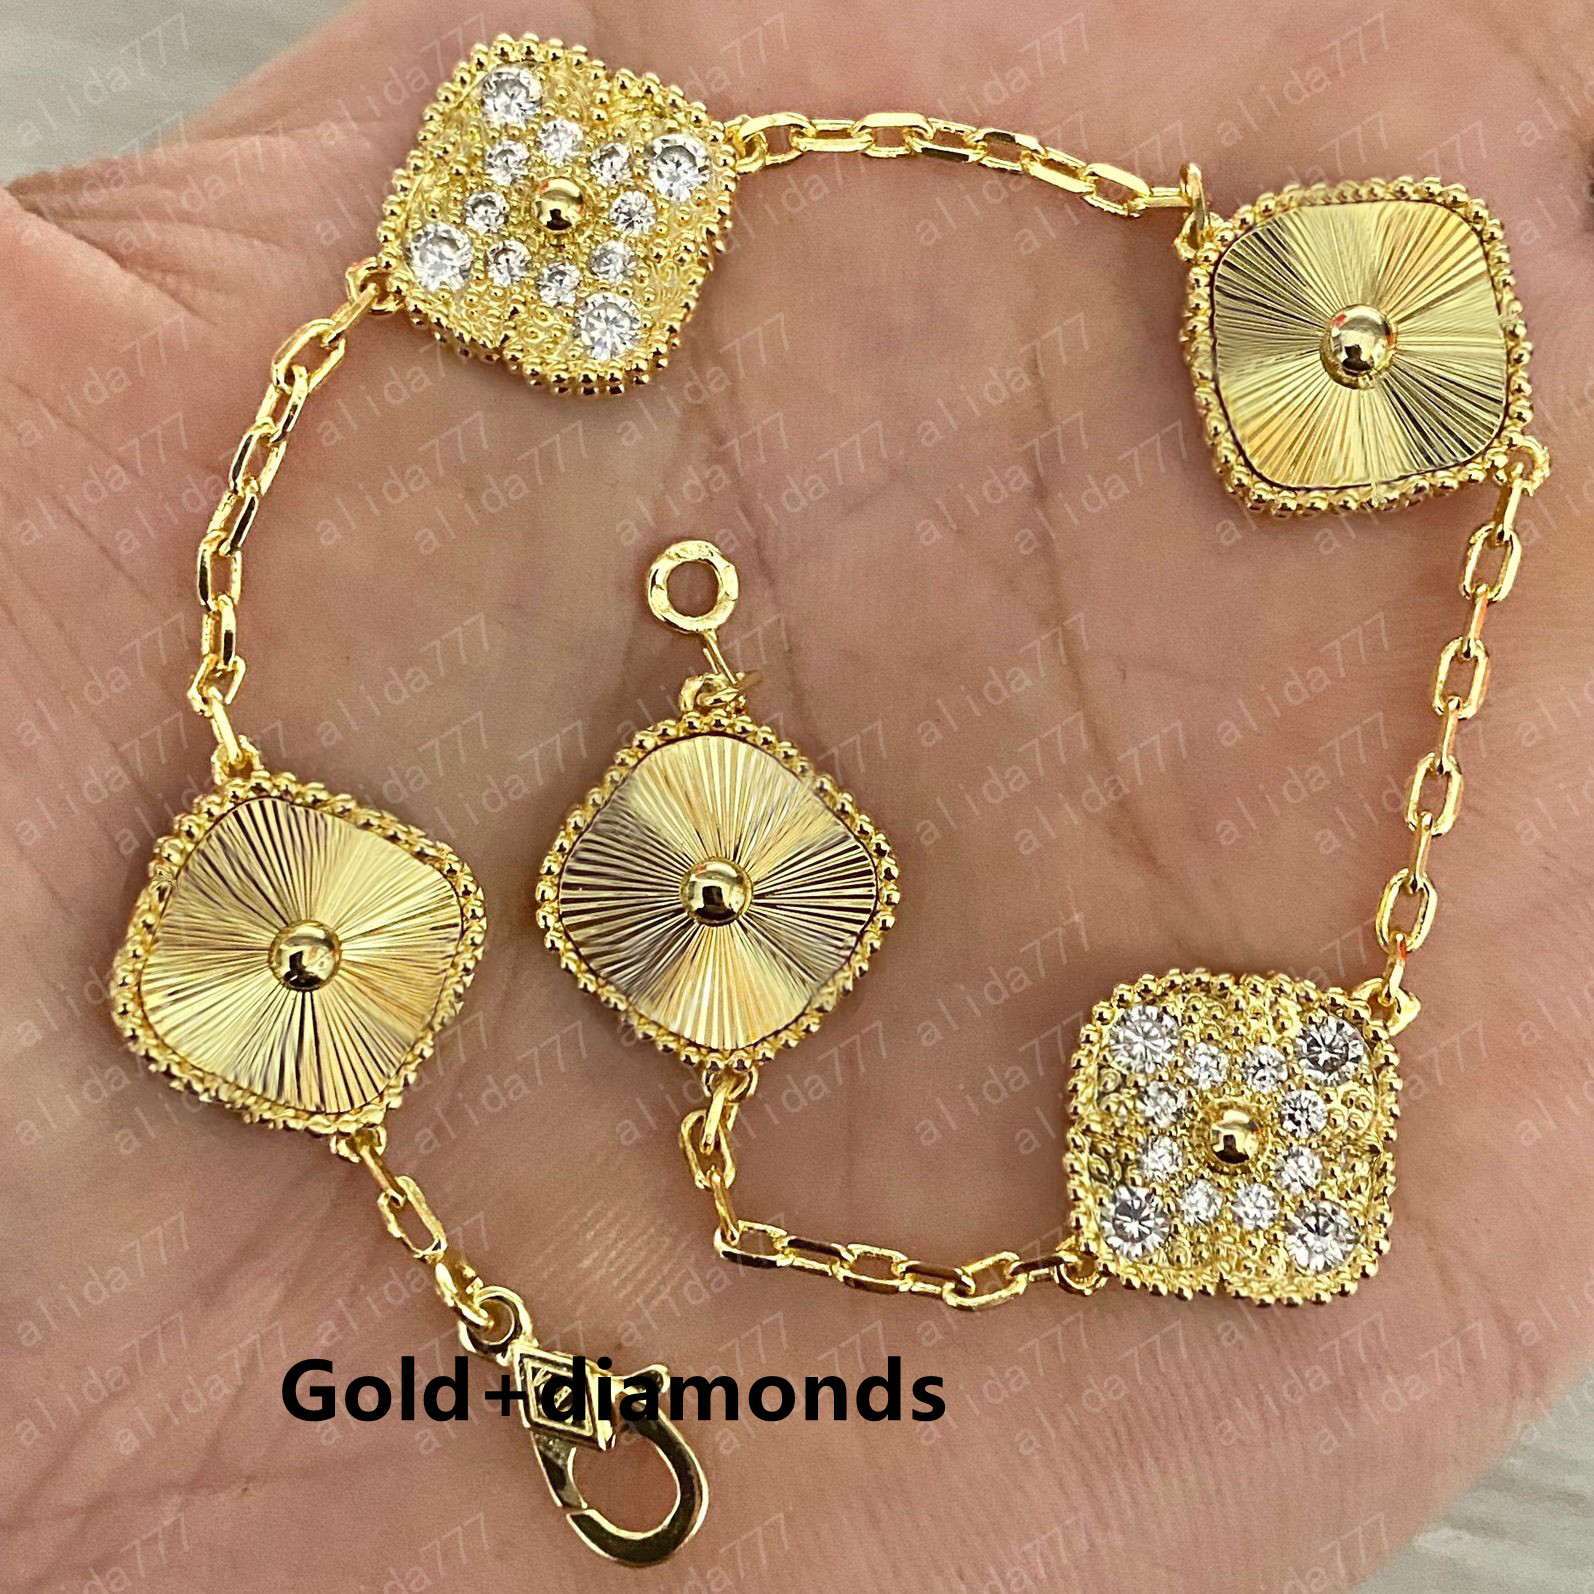 with diamonds Classic 4/Four Leaf Clover Charm Bracelets Bangle Chain 18K Gold Agate Shell Mother-of-Pearl for Women&Girl Wedding Mother Day Jewelry Women gifts